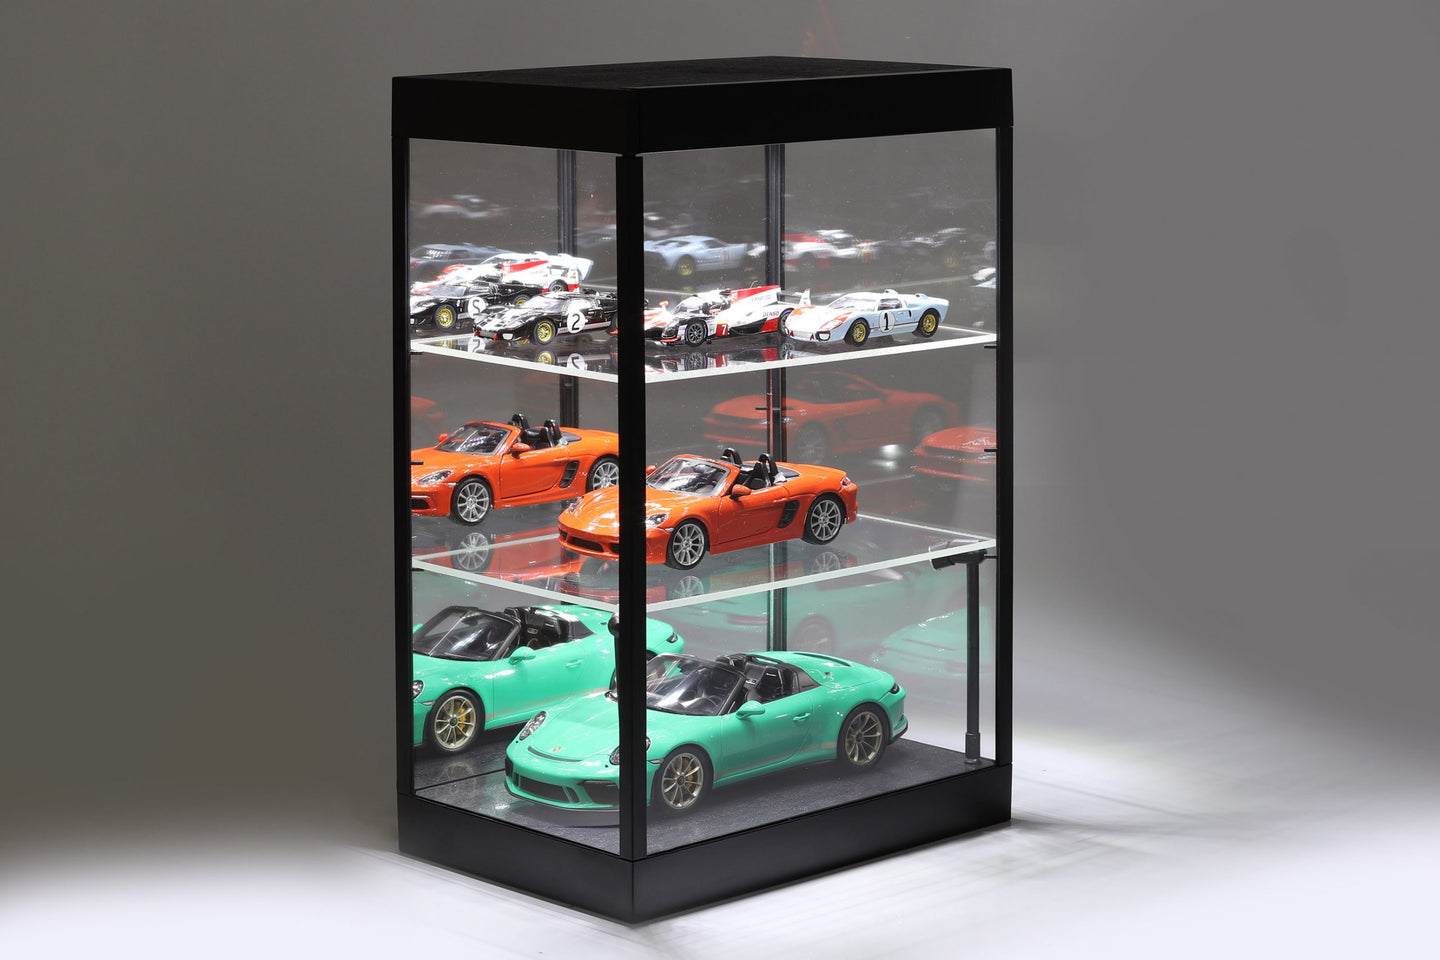 Led Display case with Mirror Back Wall for 1:18 modelcars, Black